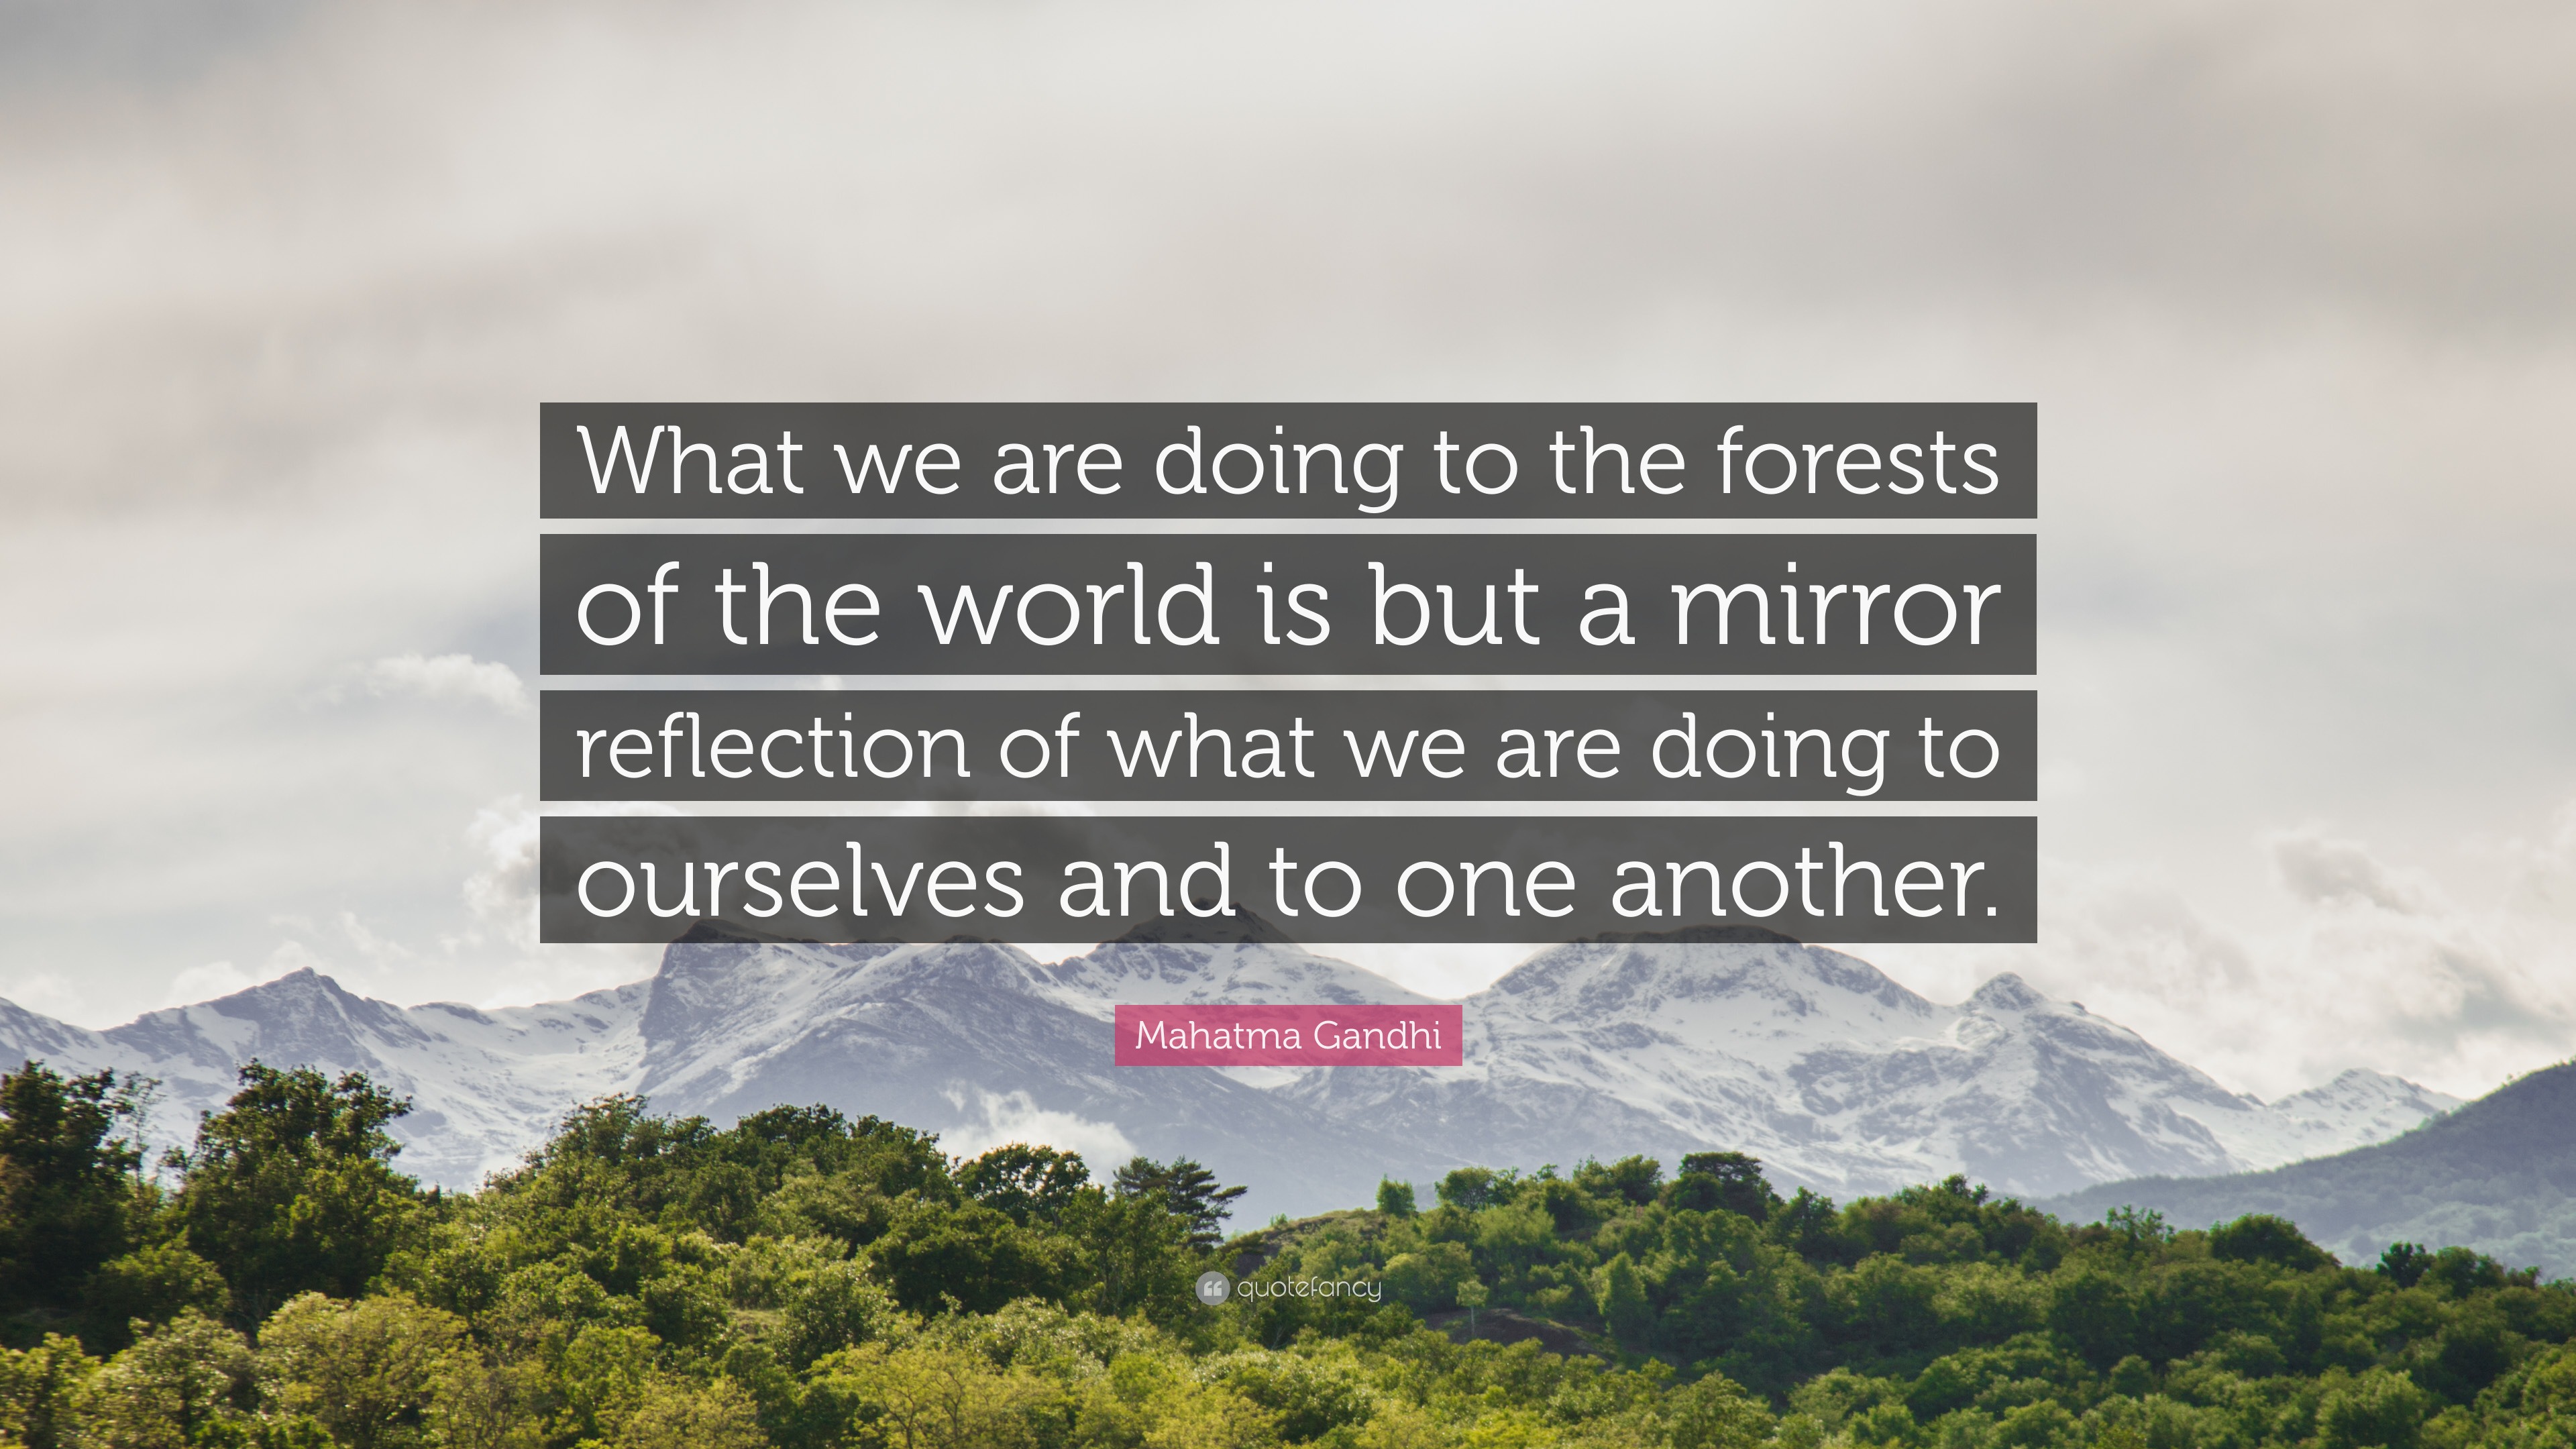 Mahatma Gandhi Quote What We Are Doing To The Forests Of The World Is But A Mirror Reflection Of What We Are Doing To Ourselves And To One An